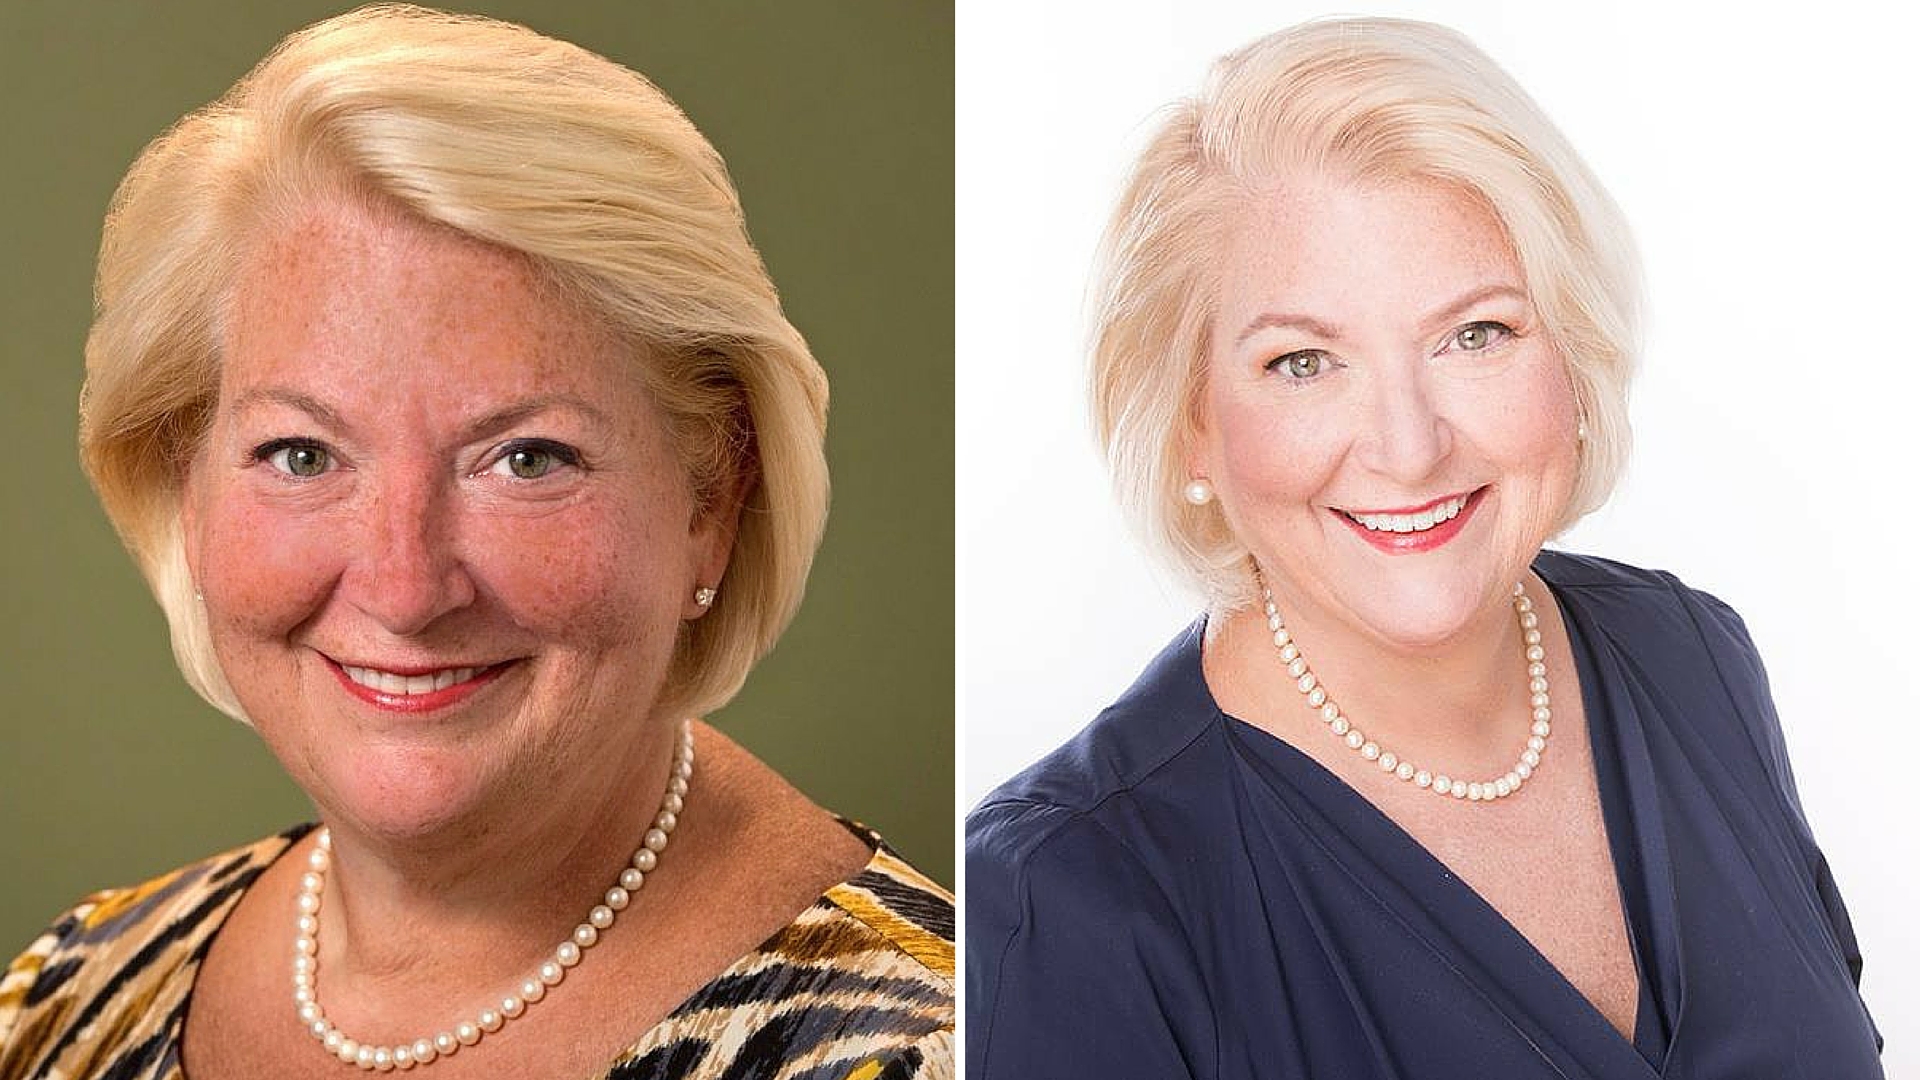  Which headshot does a better job "selling" her professionalism and expertise as a Realtor?